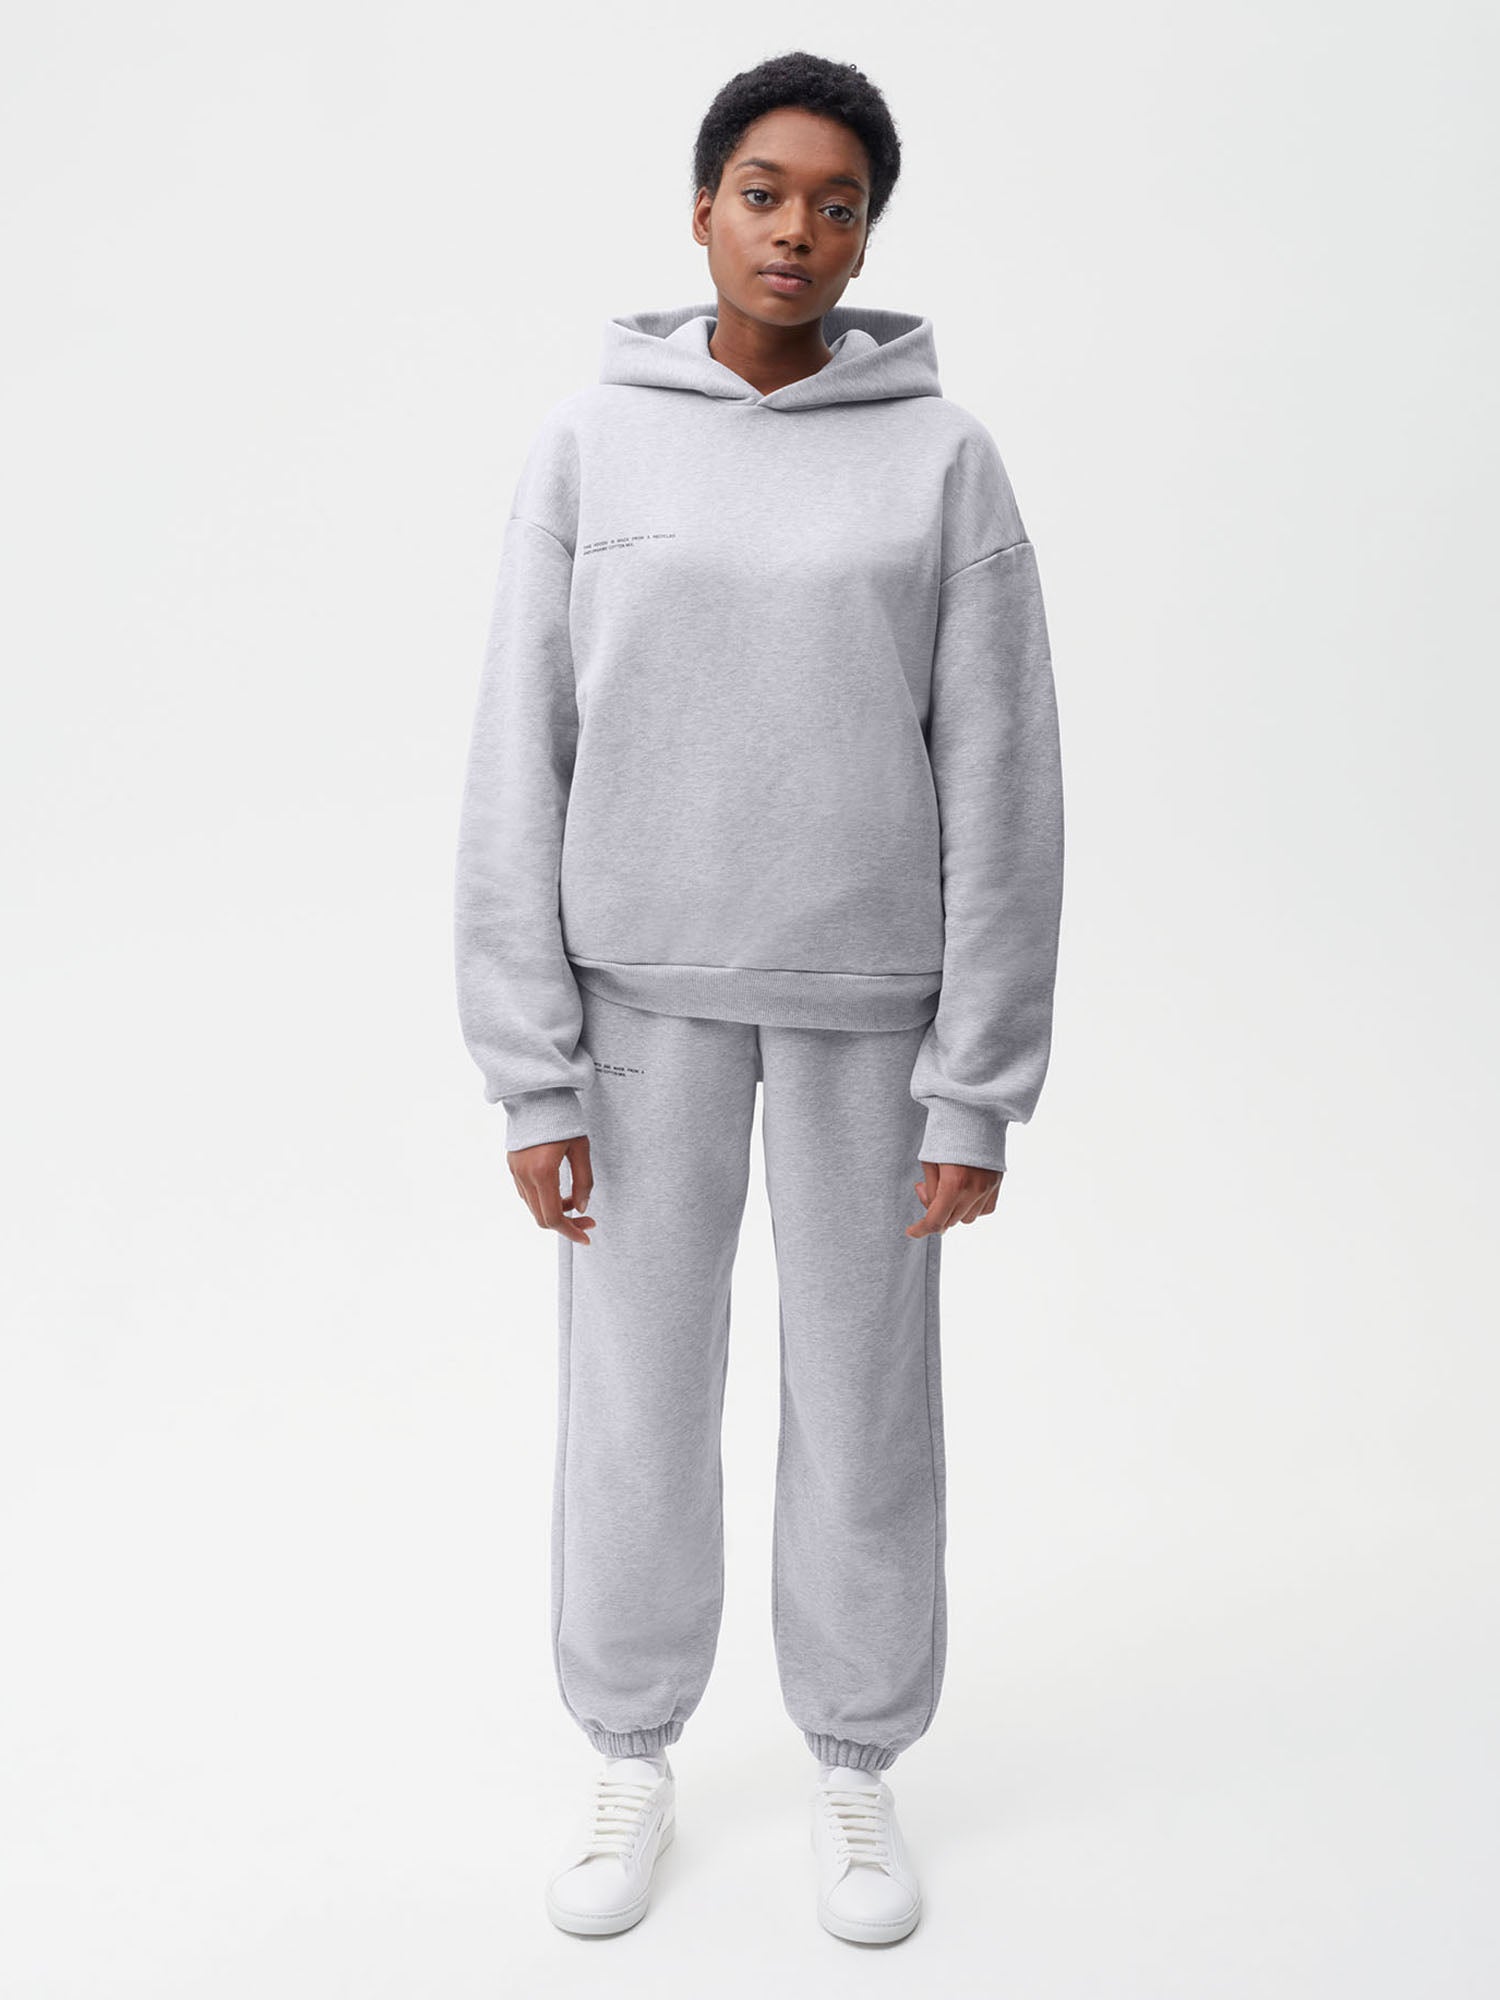 Heavyweight Recycled Cotton Track Pants Grey Marl Female Model